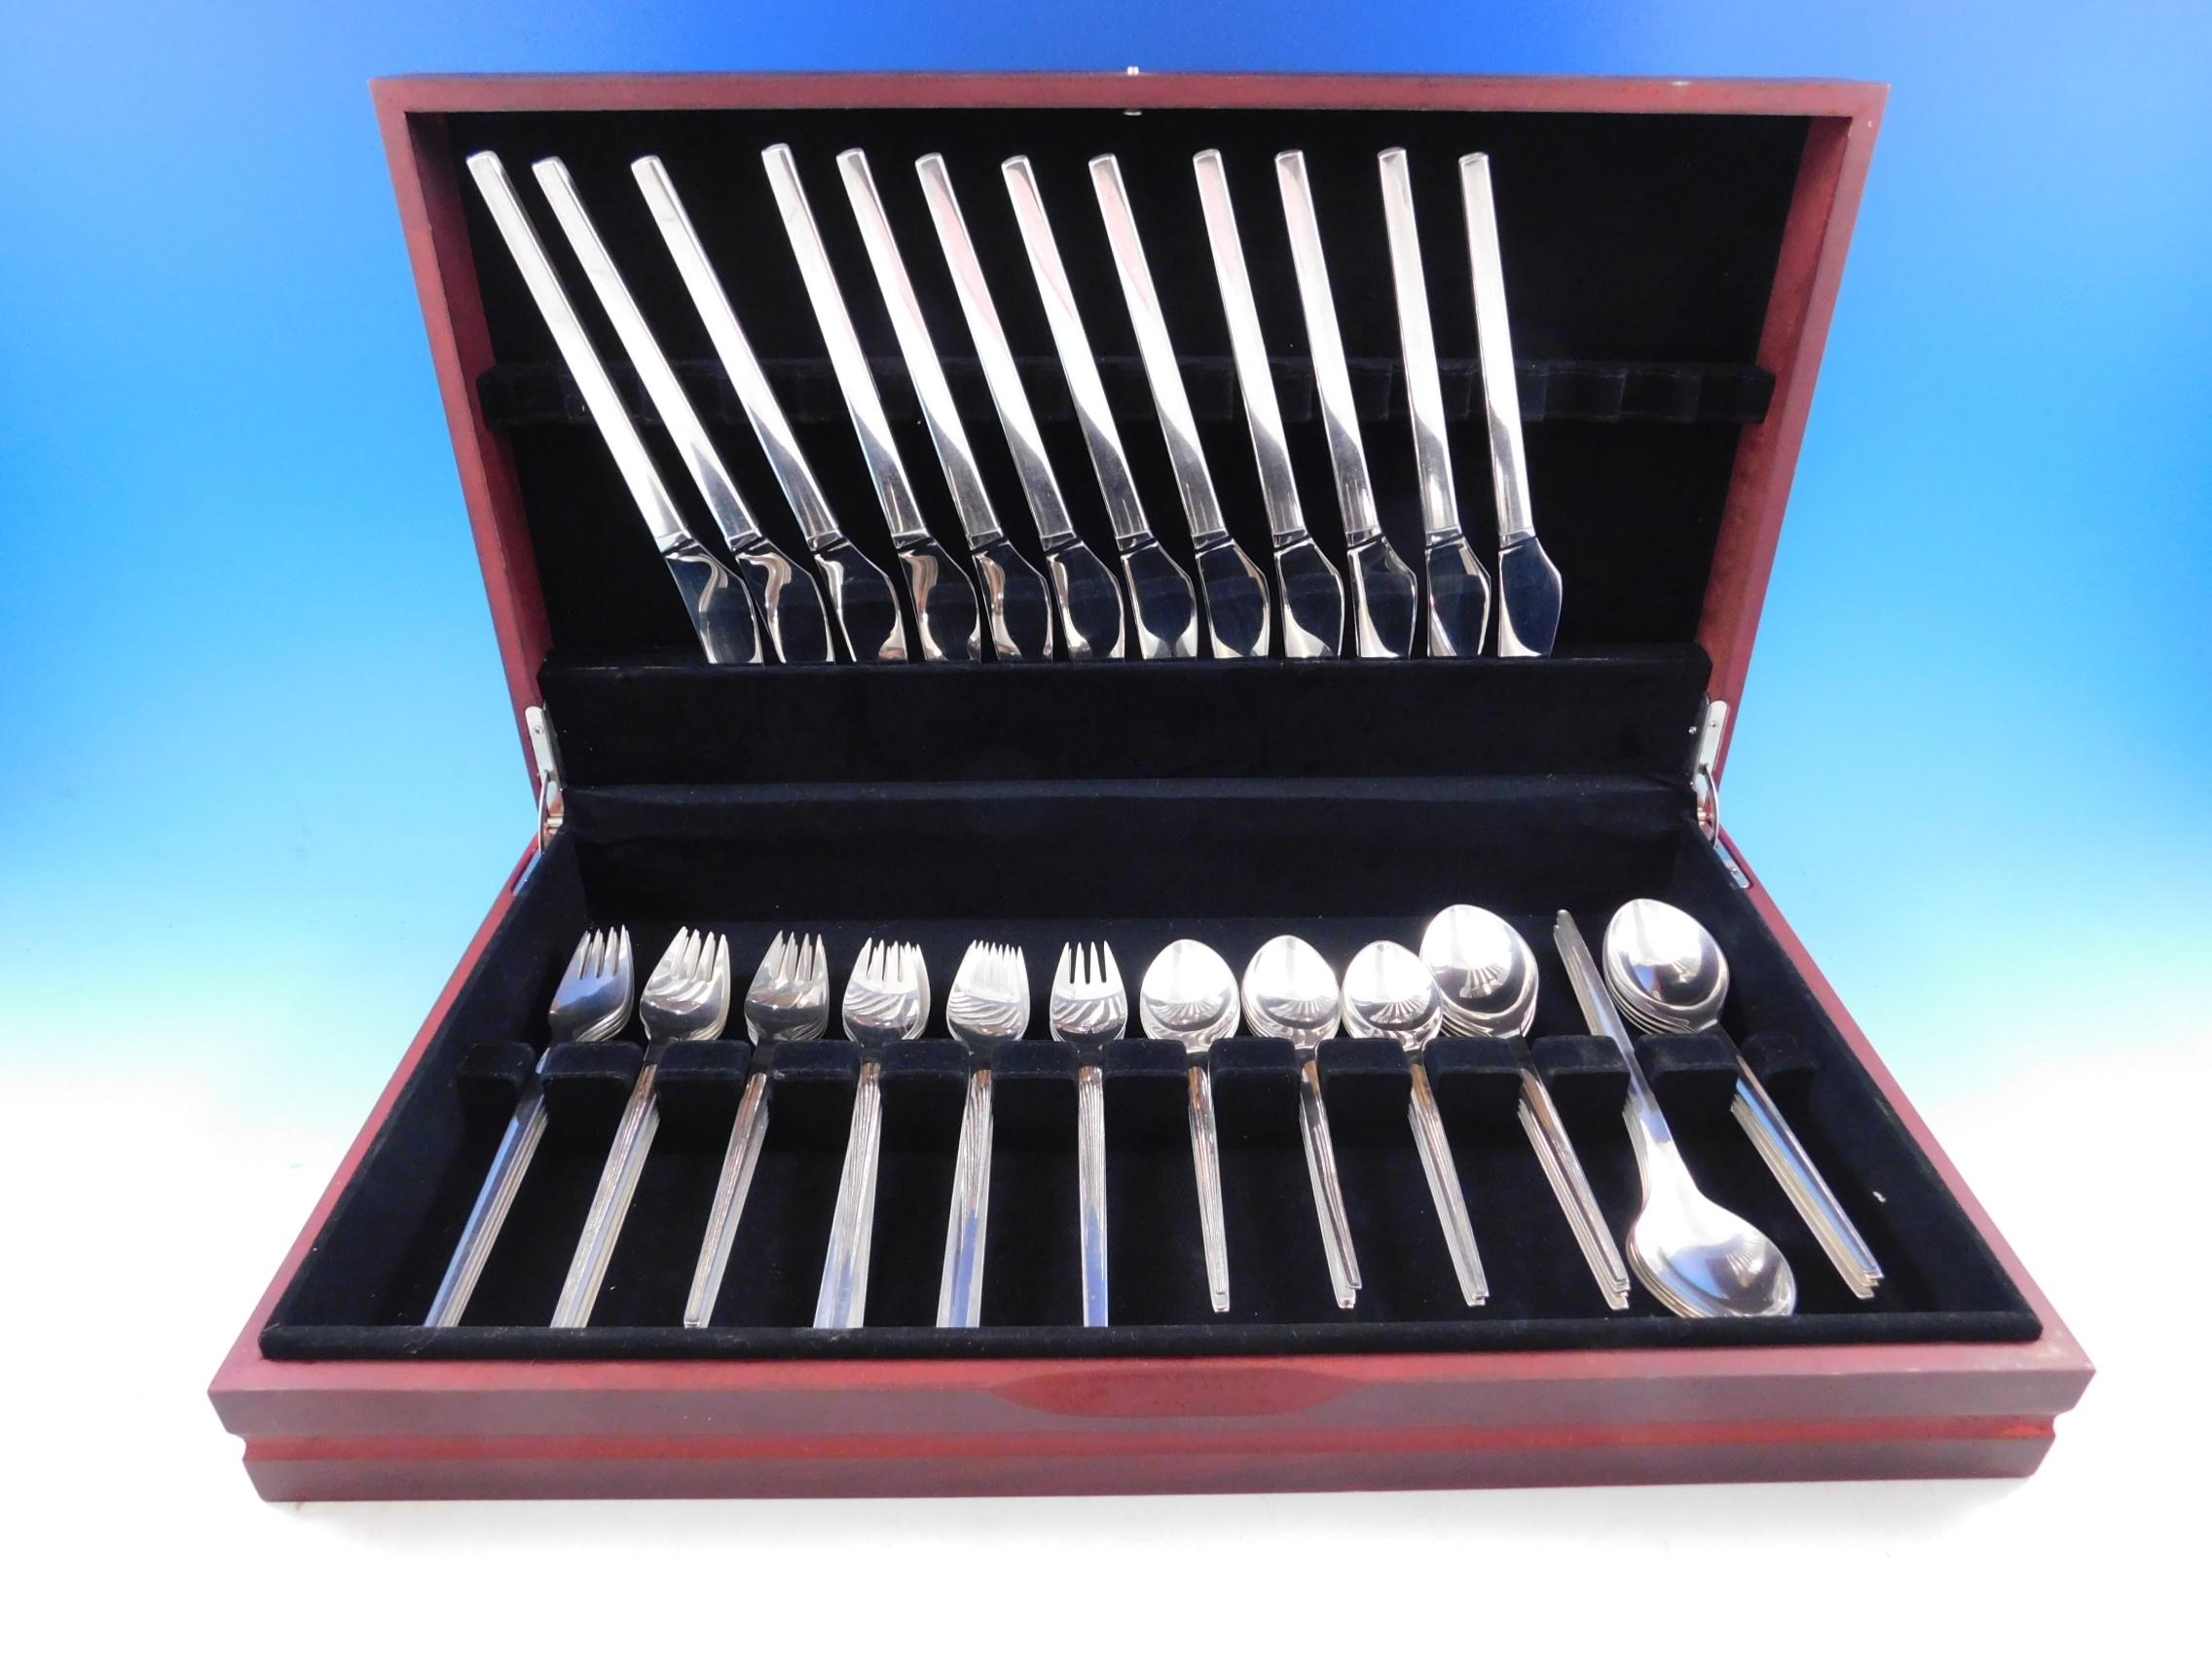 
Rare Dinner size Argo Fregat by Georg Jensen sterling silver Flatware set, 60 pieces. This set includes:

12 dinner size knives, long handle, 8 7/8